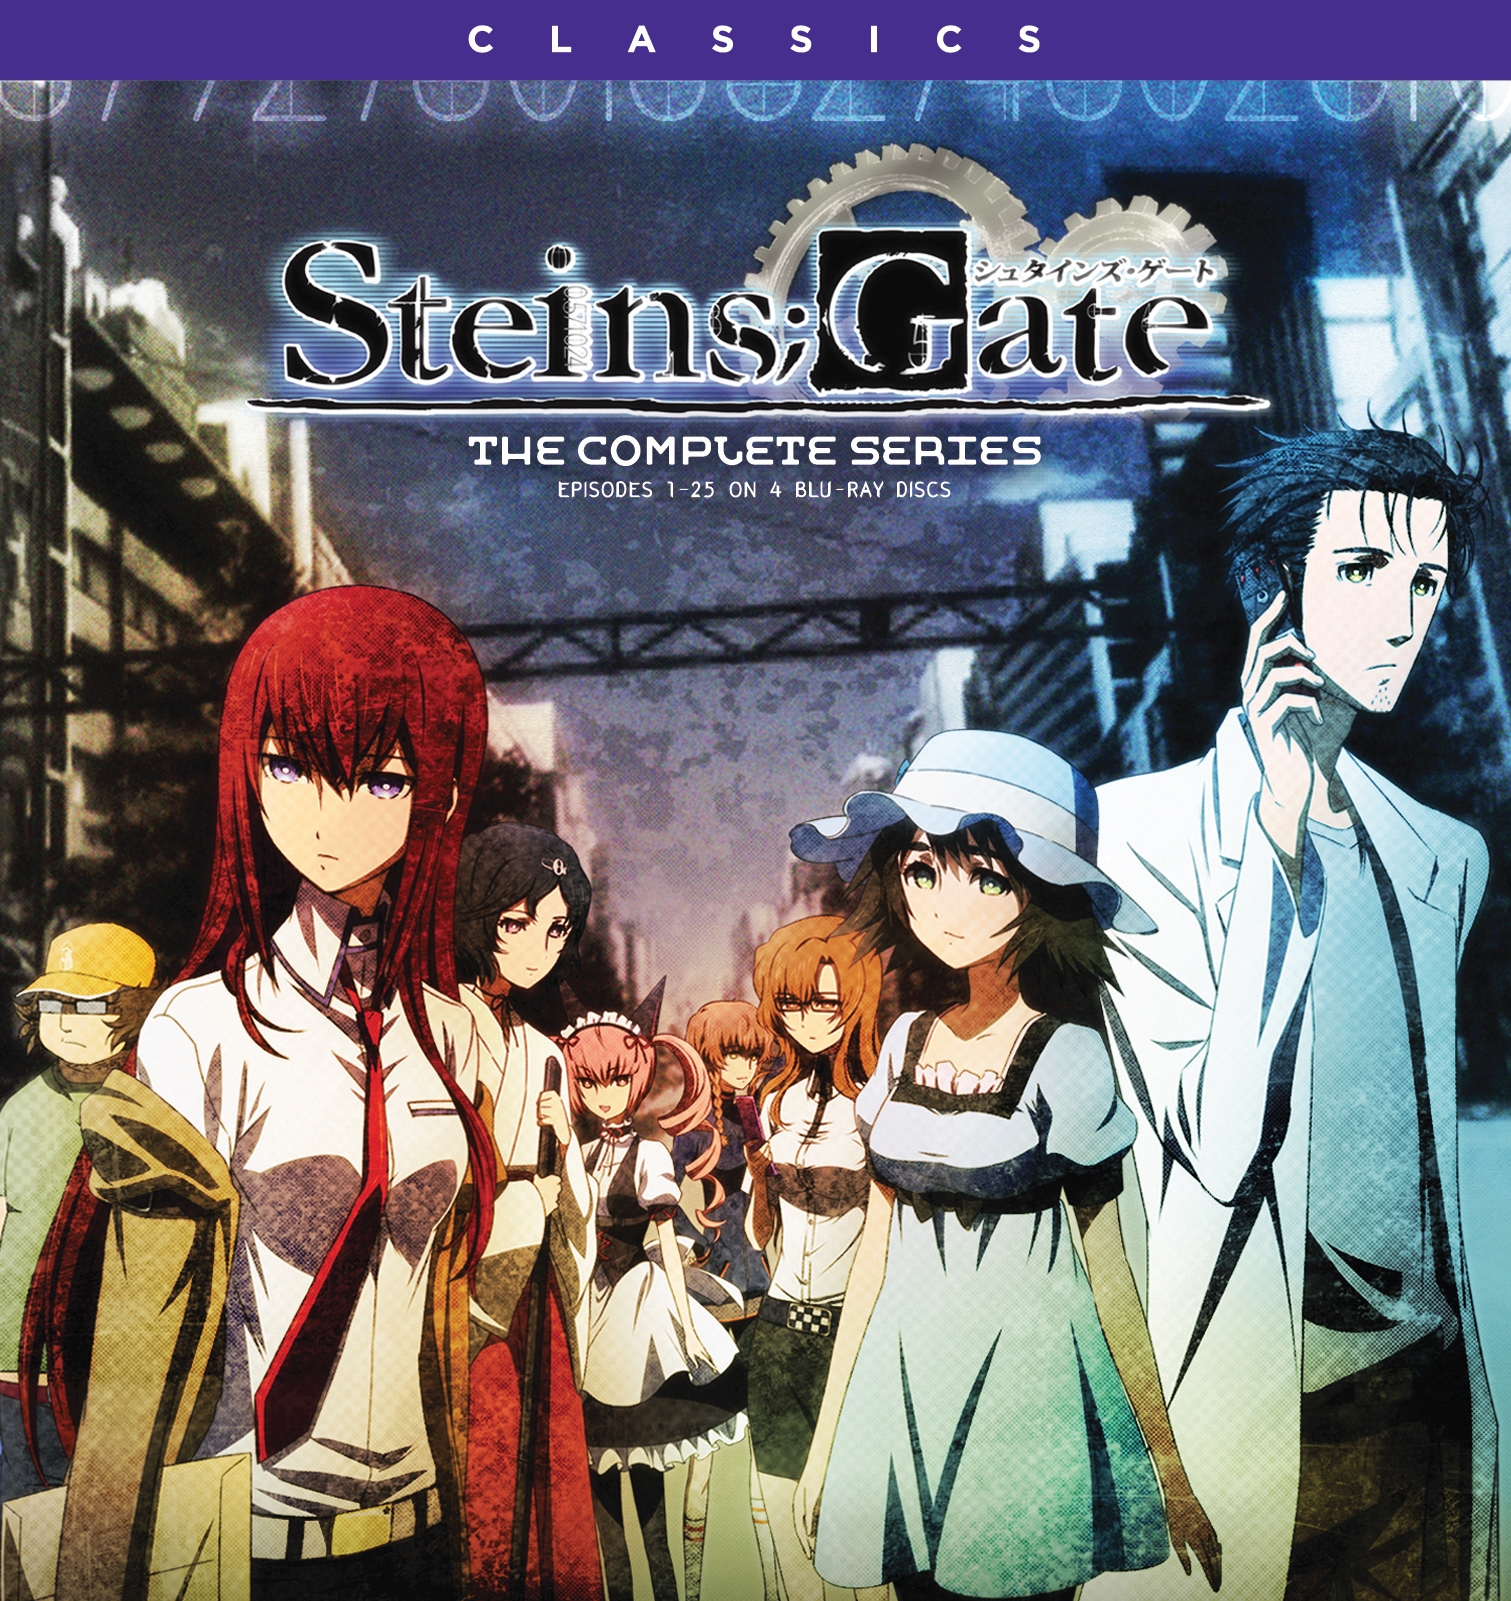 SteinsGate Things The Visual Novel Does Better Than The Anime